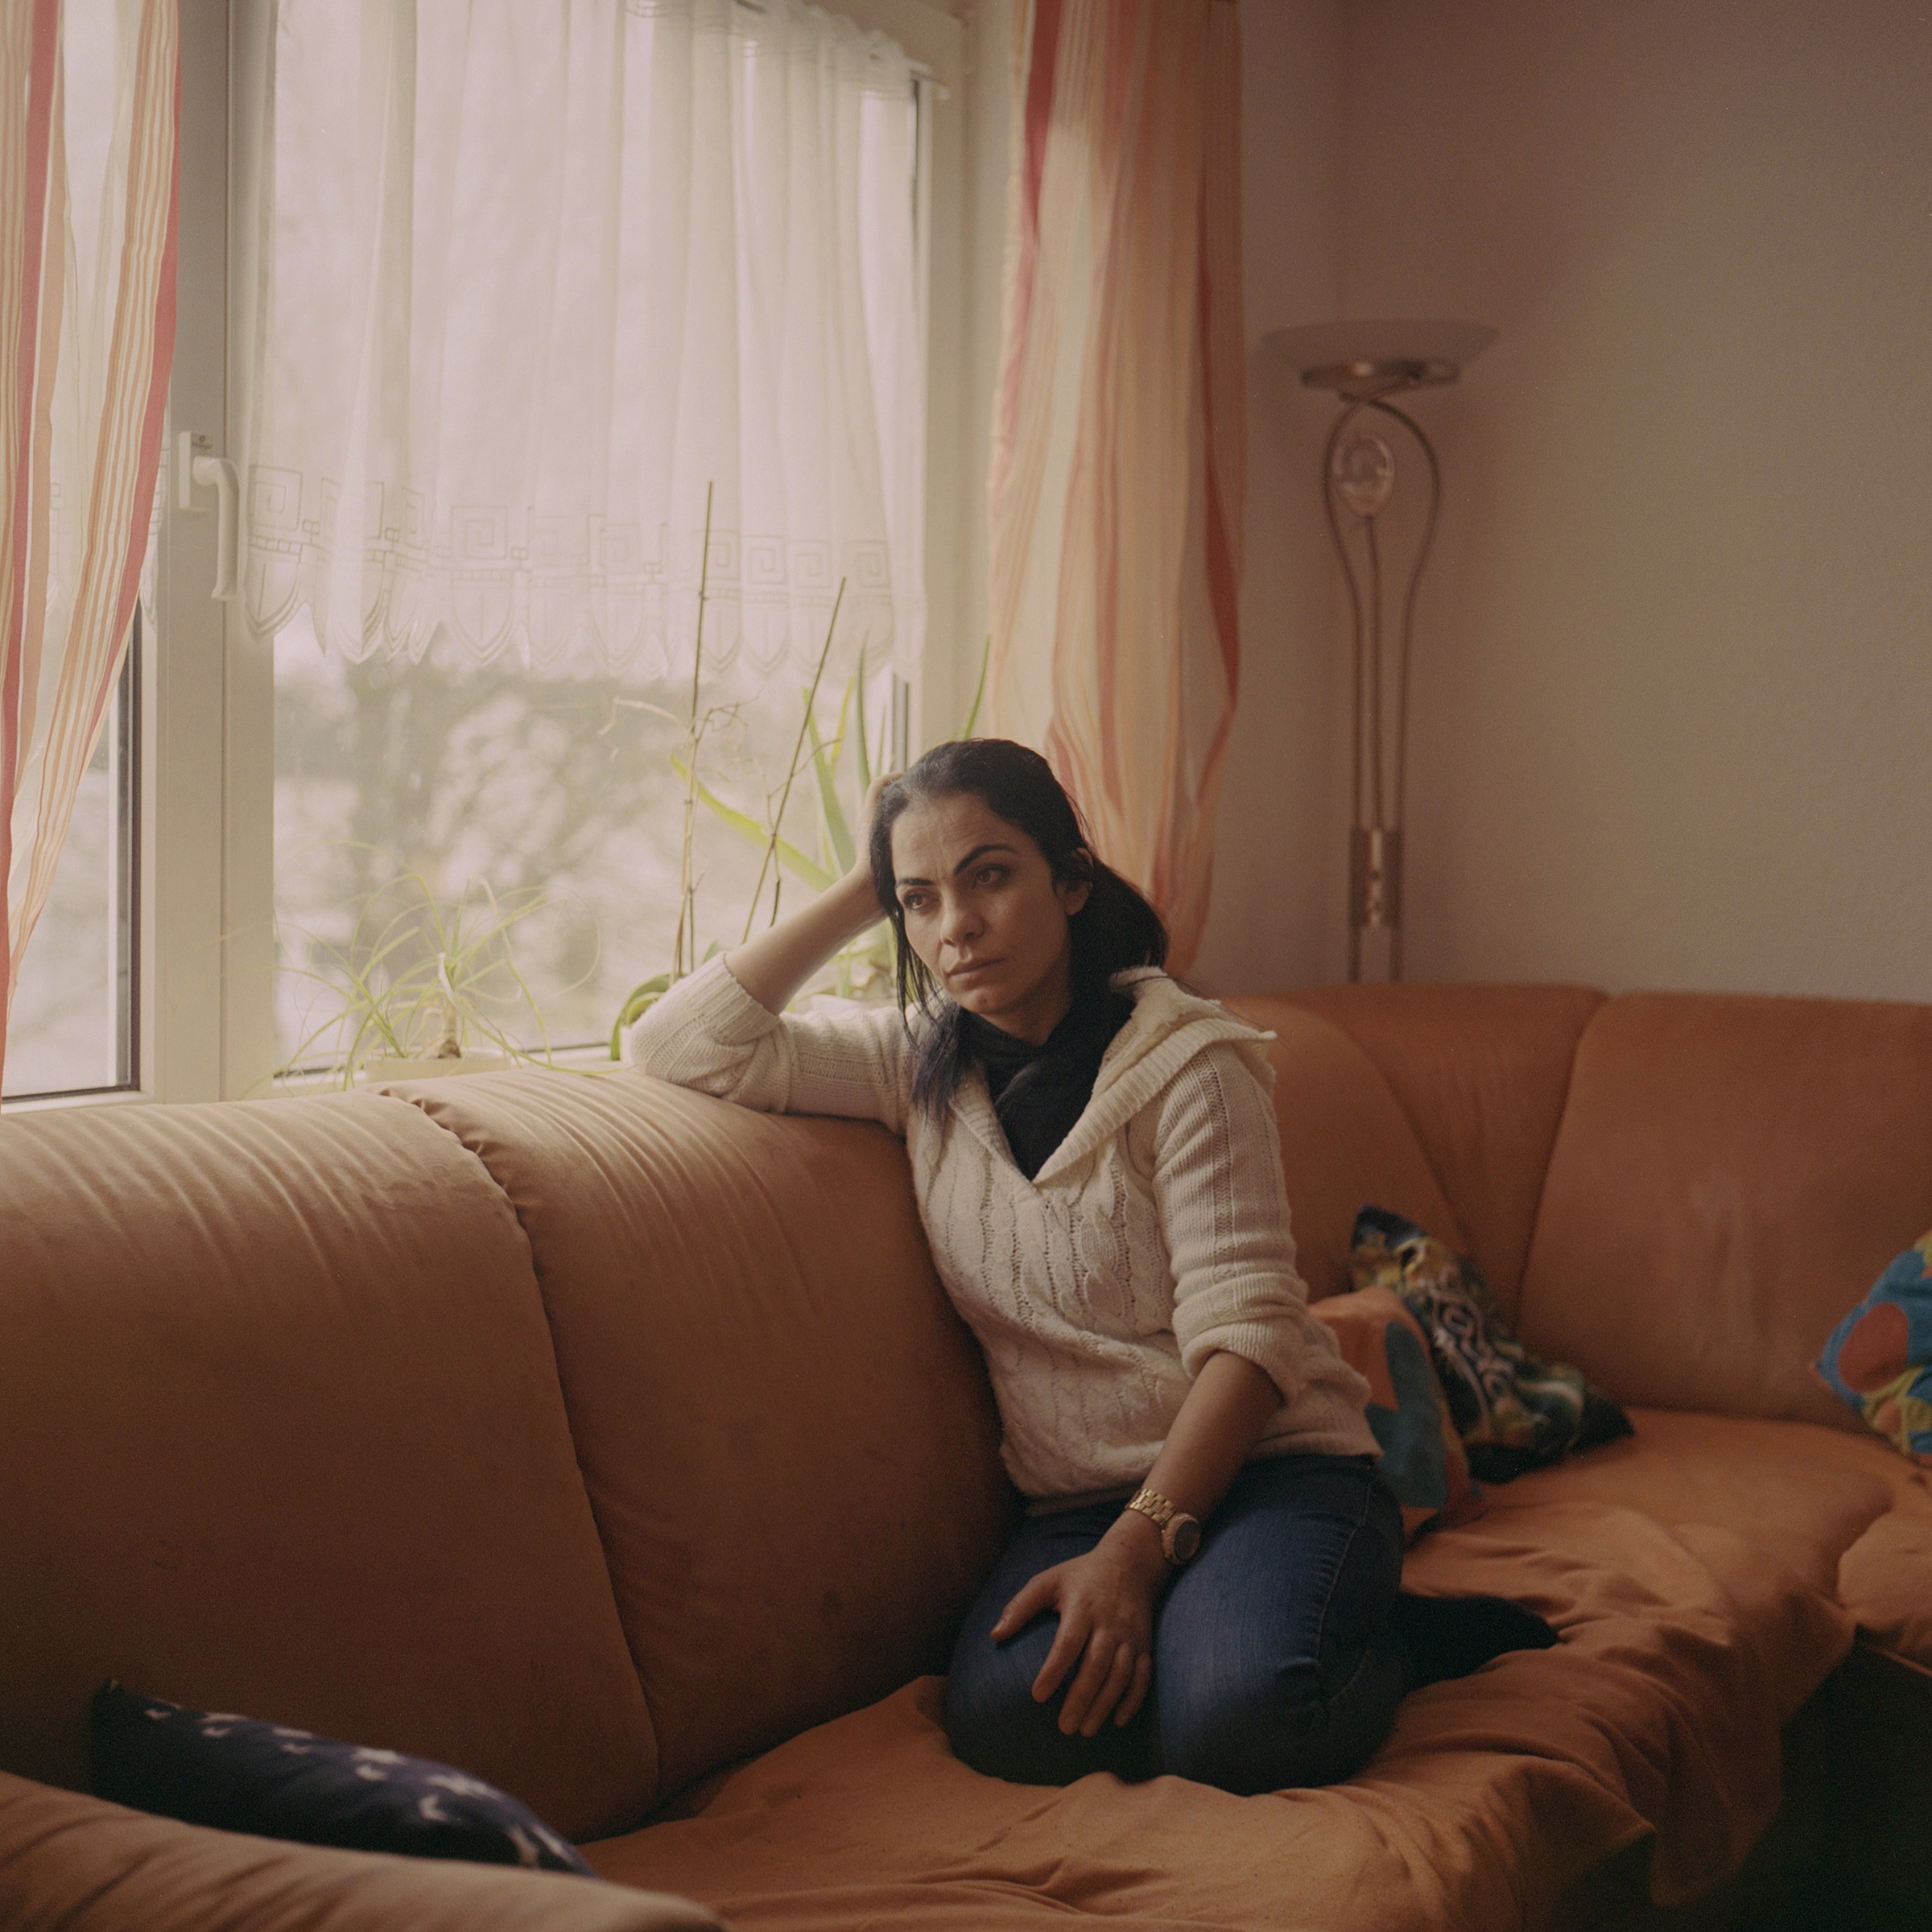 <strong>Hanan</strong> on the sofa in her living room in Germany. "<a href="https://time.com/5878967/yazidi-woman-germany-program/">A Radical German Program Promised a Fresh Start to Yazidi Survivors of ISIS Captivity. But Some Women Are Still Longing for Help</a>," Aug. 24. (Tori Ferenc—INSTITUTE for TIME)